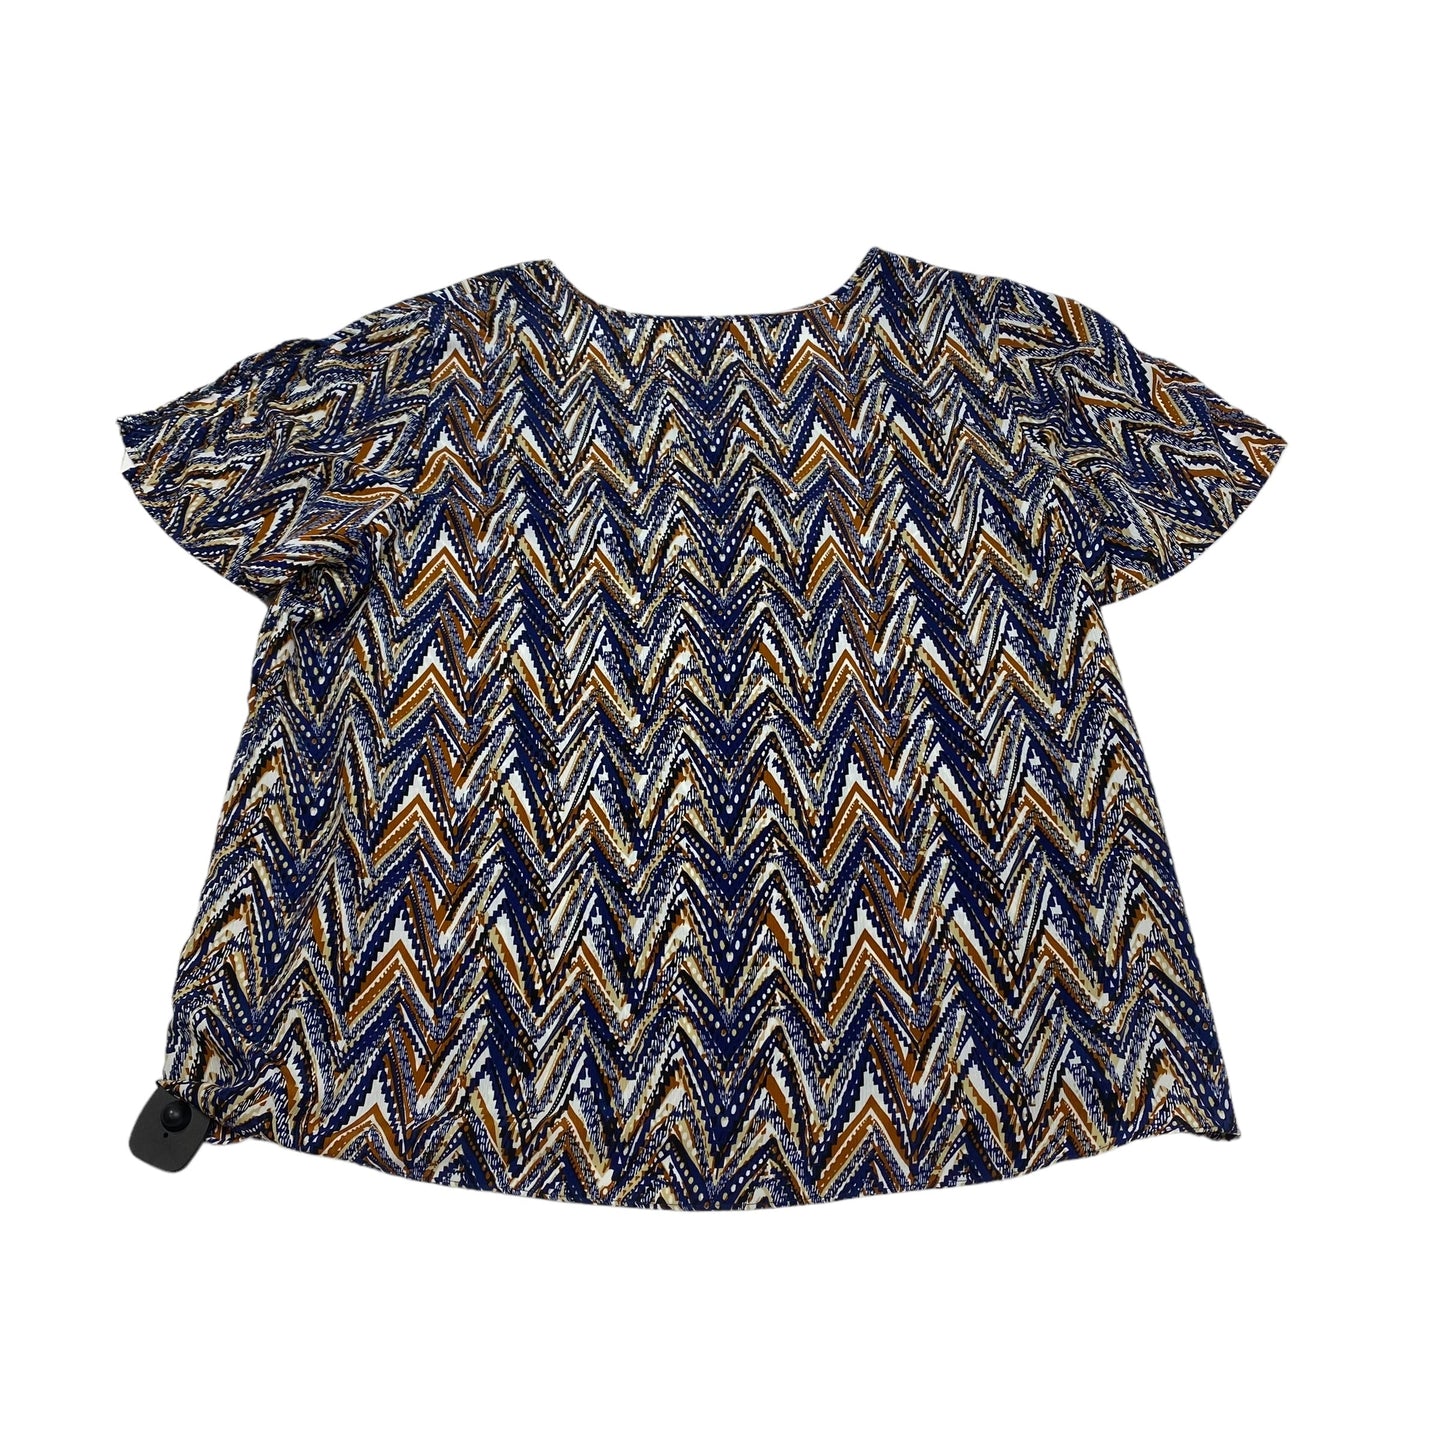 Blue & Brown Top Short Sleeve Cato, Size 3x